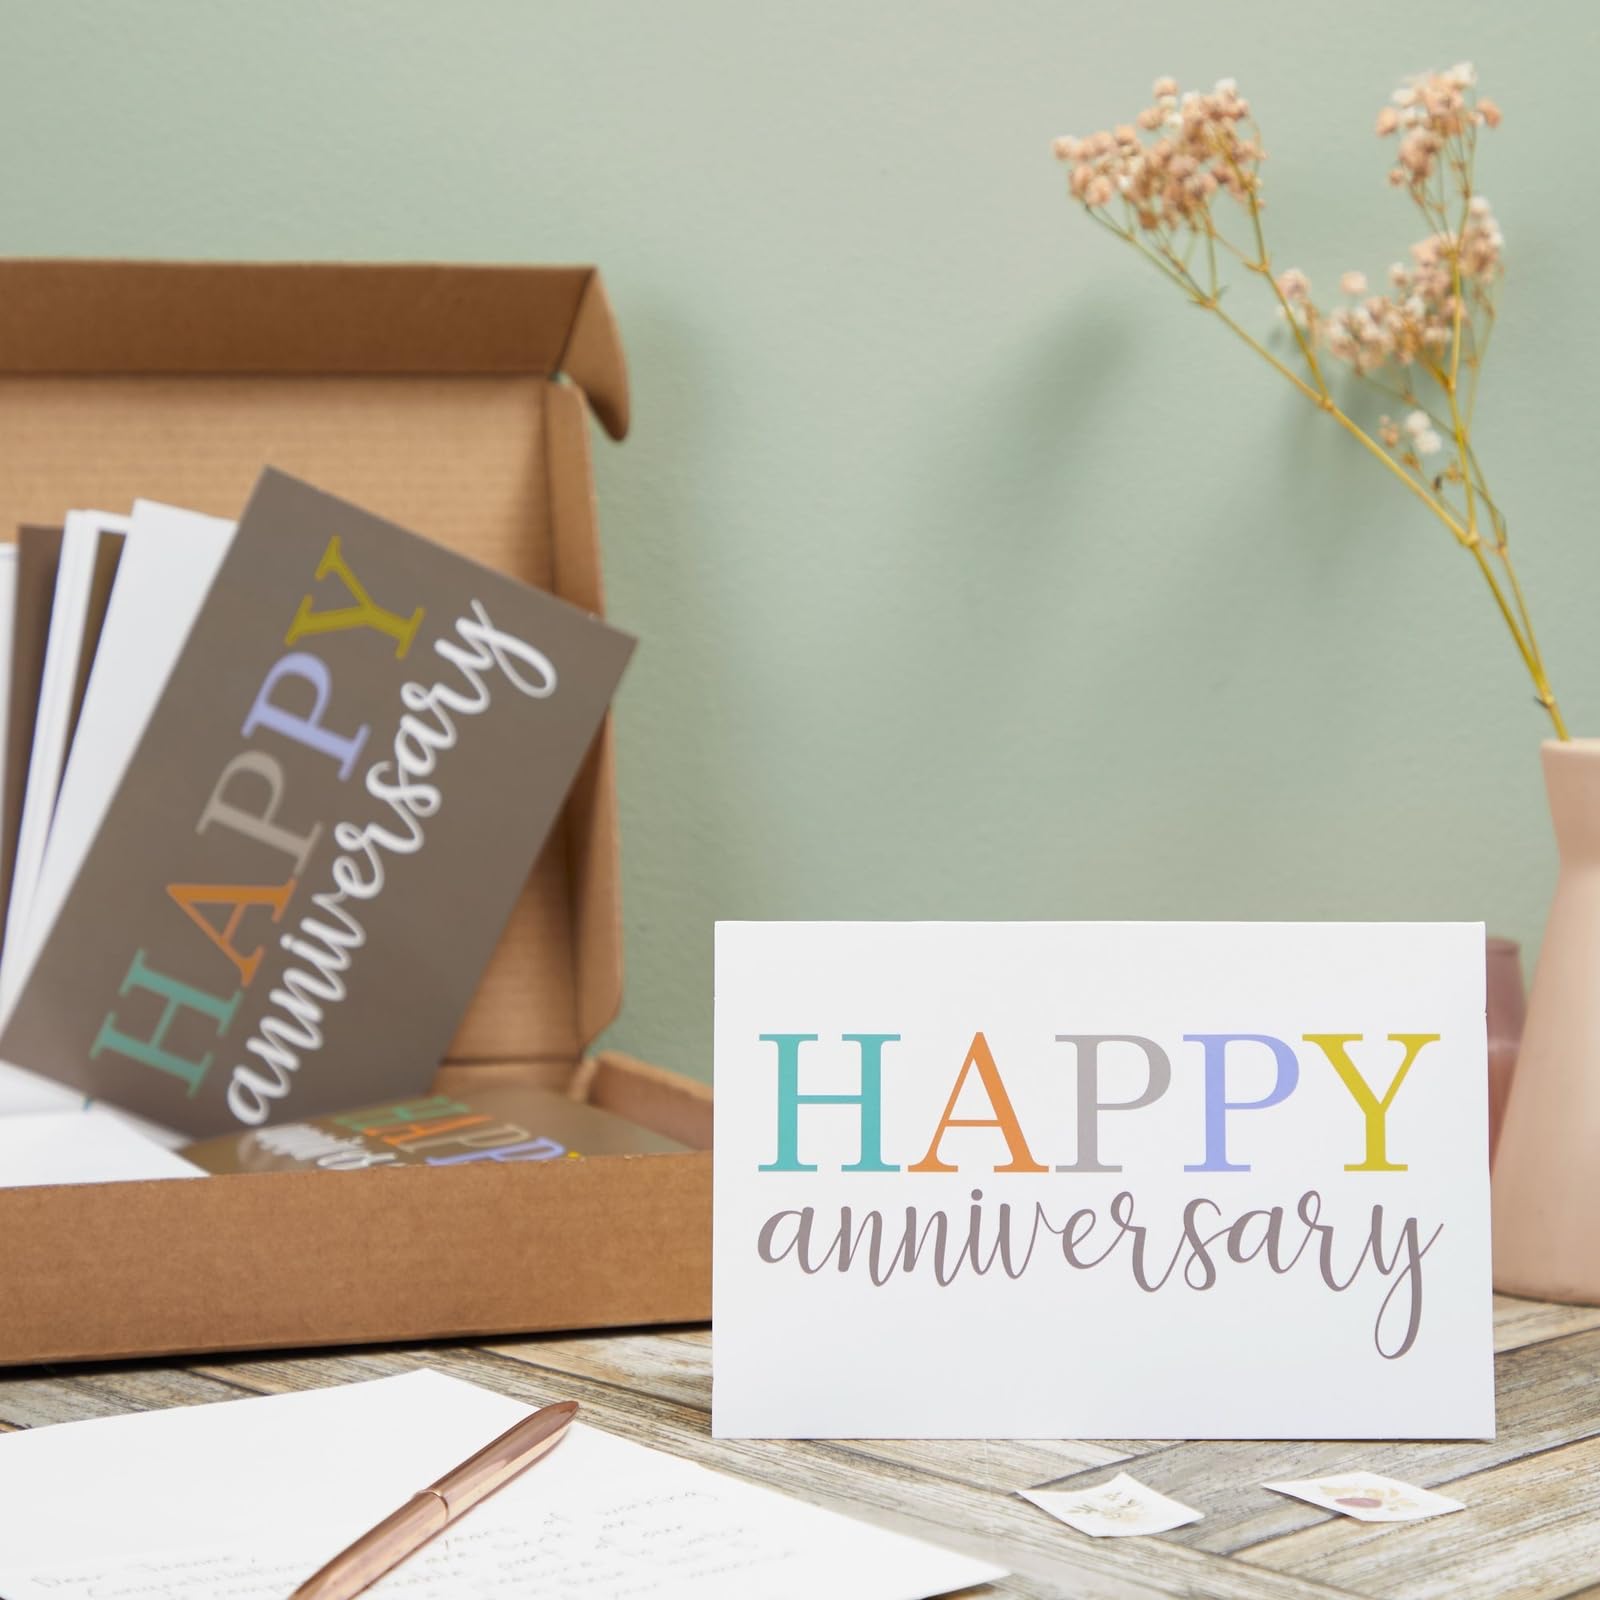 Juvale 36 Pack Happy Anniversary Cards with Envelopes for Work, Wedding, Employees, 6 Designs (Blank Inside, 4x6 In)